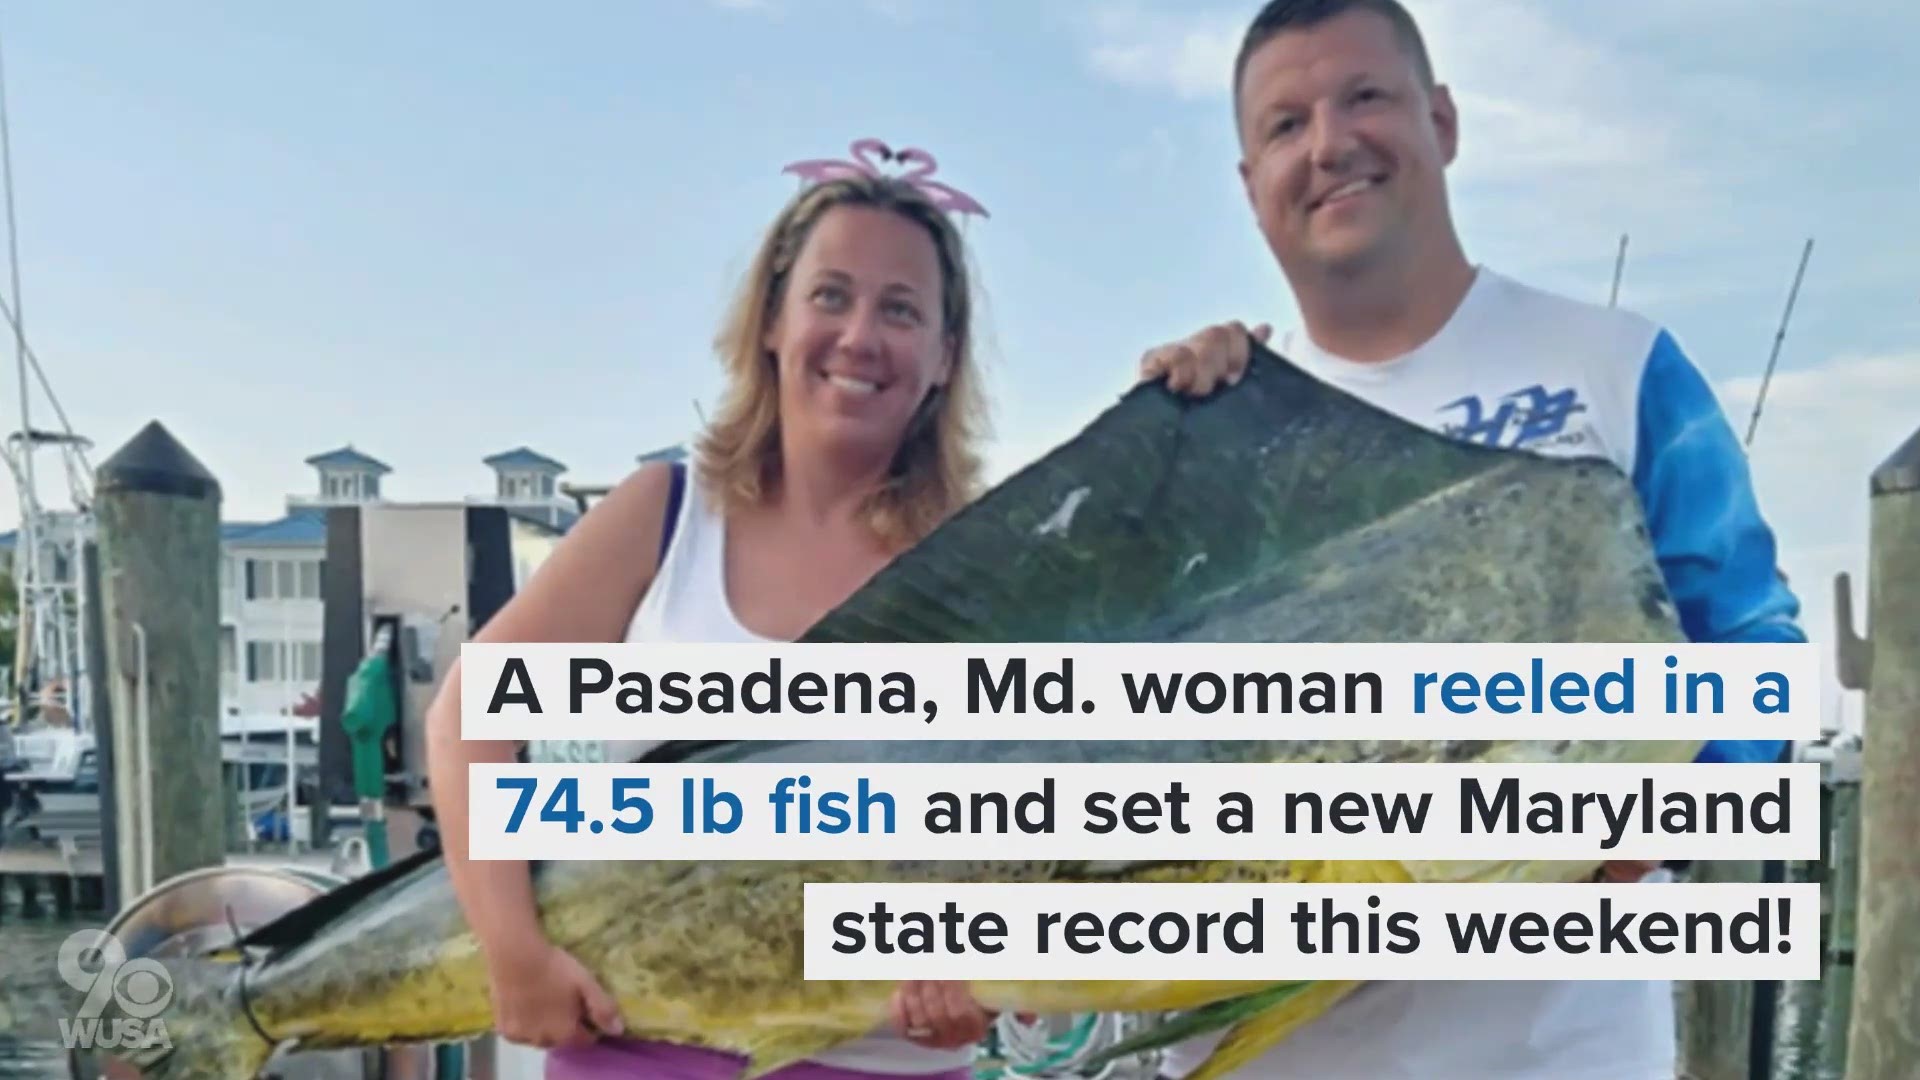 An angler from Pasadena, Md. broke the Maryland state record for the largest common dolphinfish catch in the state over the weekend. The common dolphinfish is also known as mahi mahi.